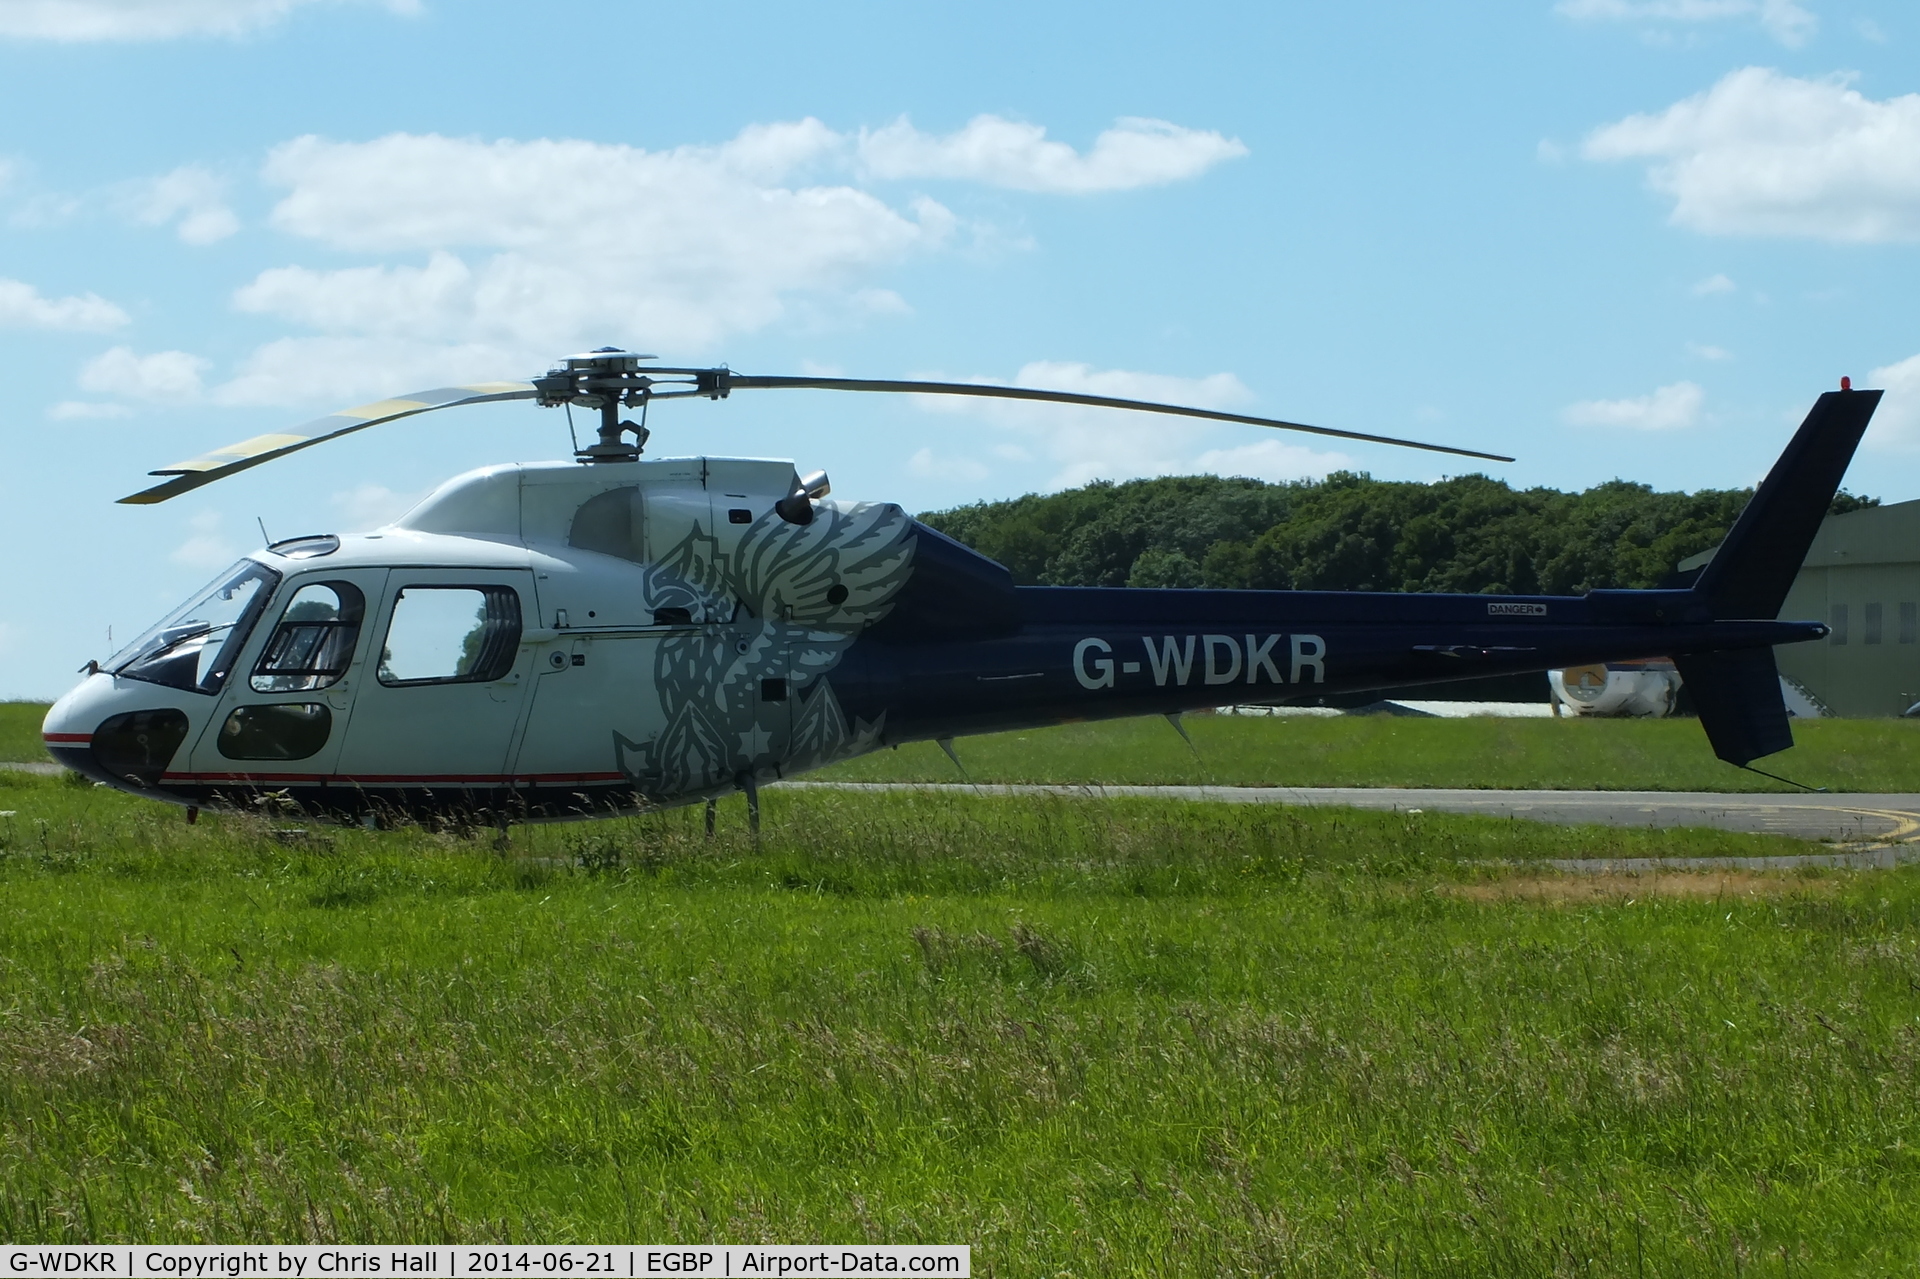 G-WDKR, 1981 Aerospatiale AS-355F-1 Ecureuil 2 C/N 5115, Cheshire Helicopters Ltd